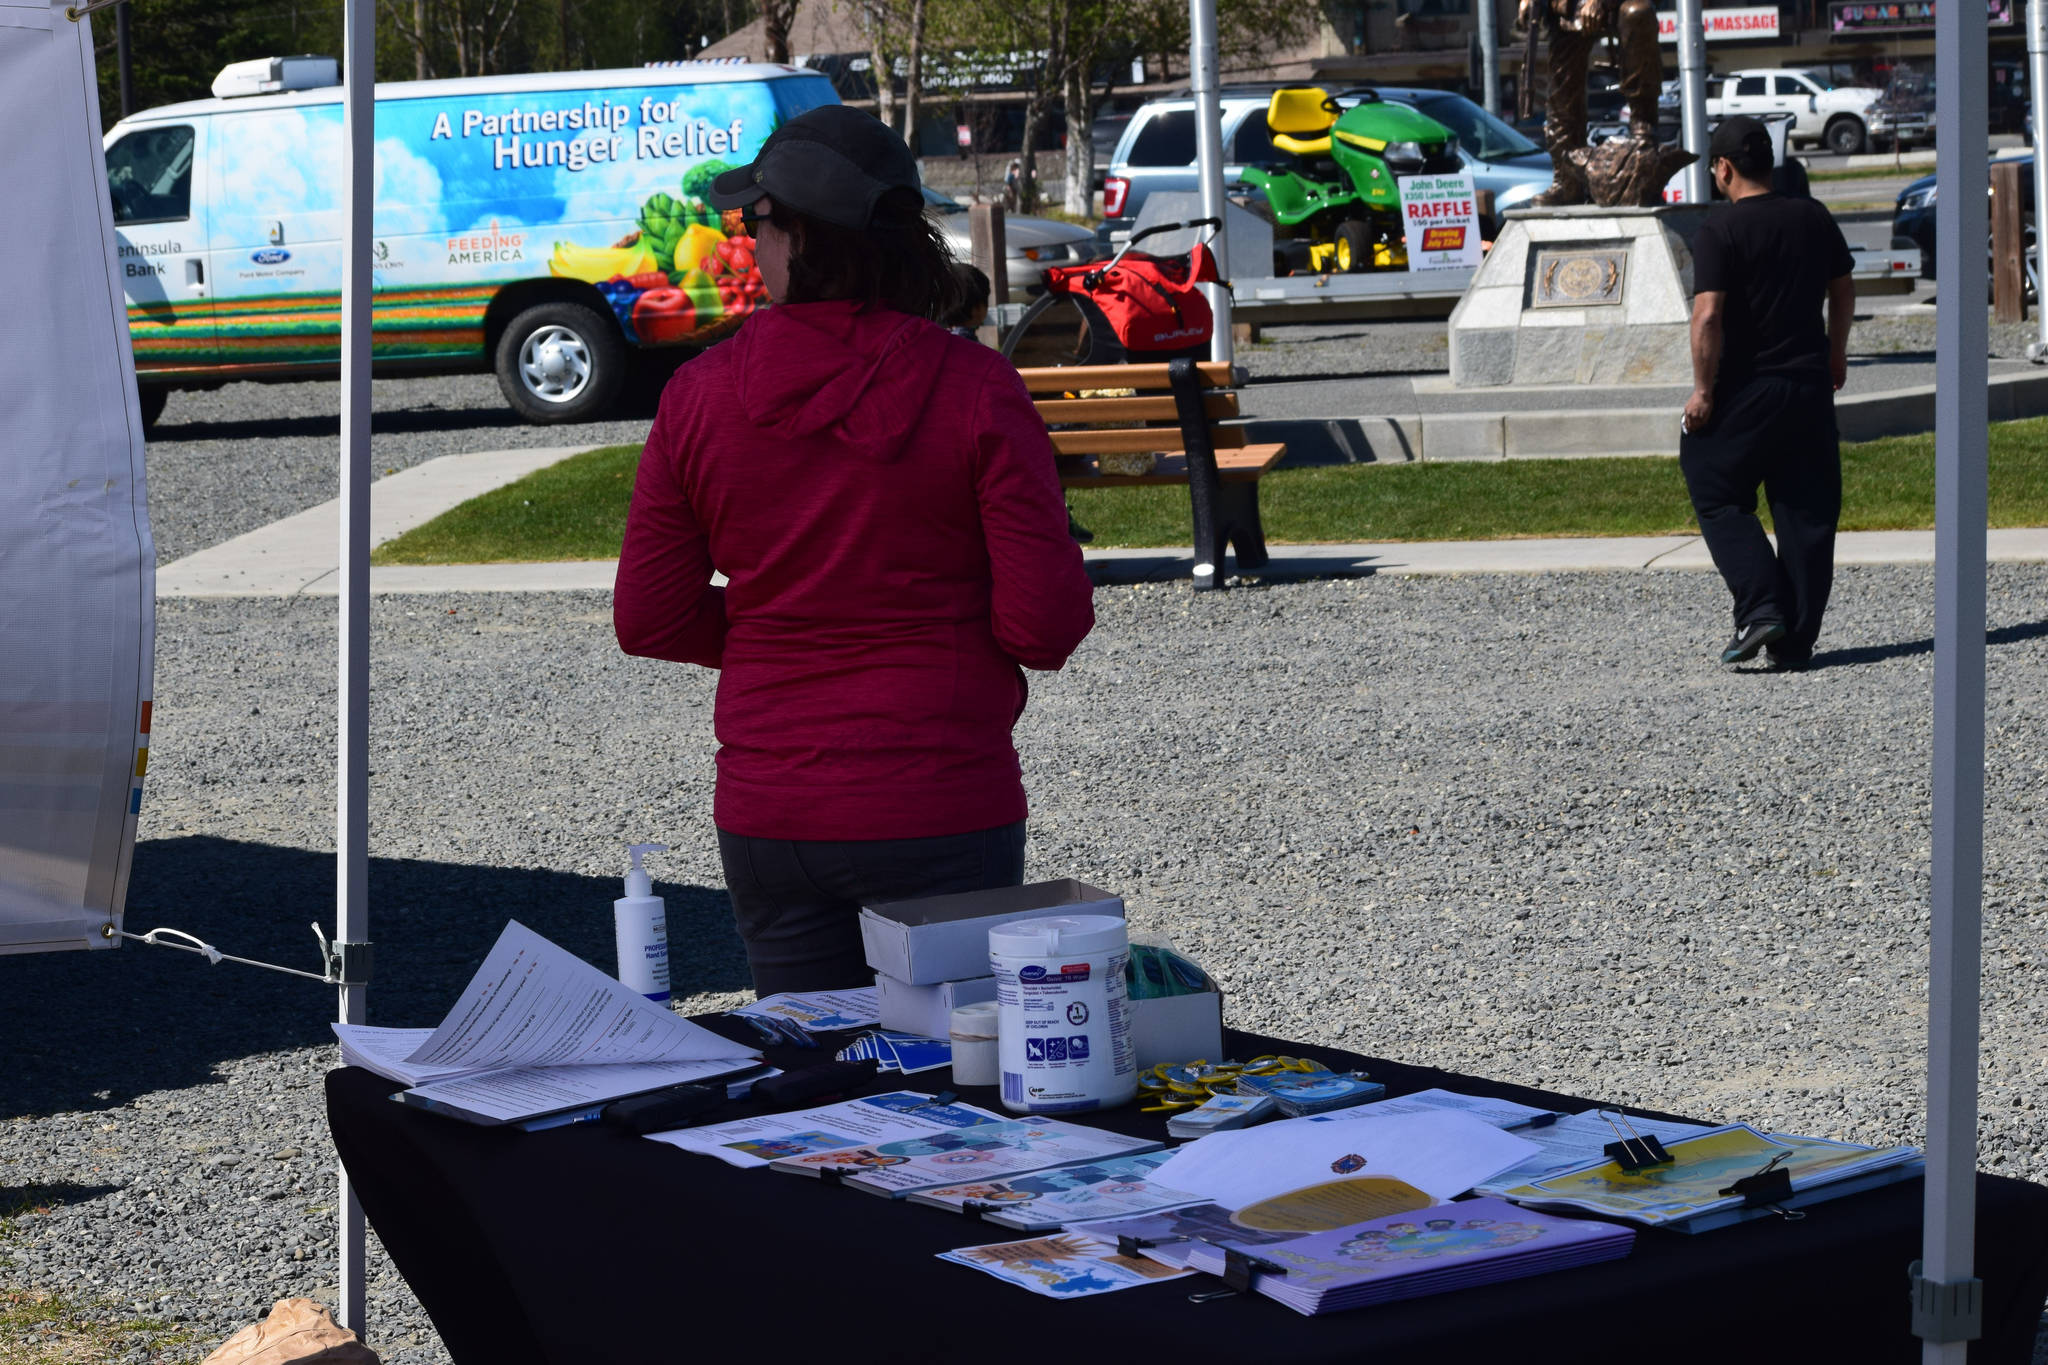 A nurse with Kenai Public Health encourages people to get their COVID-19 vaccines during the first day of the Wednesday Market in Soldotna, Alaska, on Wednesday, May 26, 2021. (Camille Botello / Peninsula Clarion)